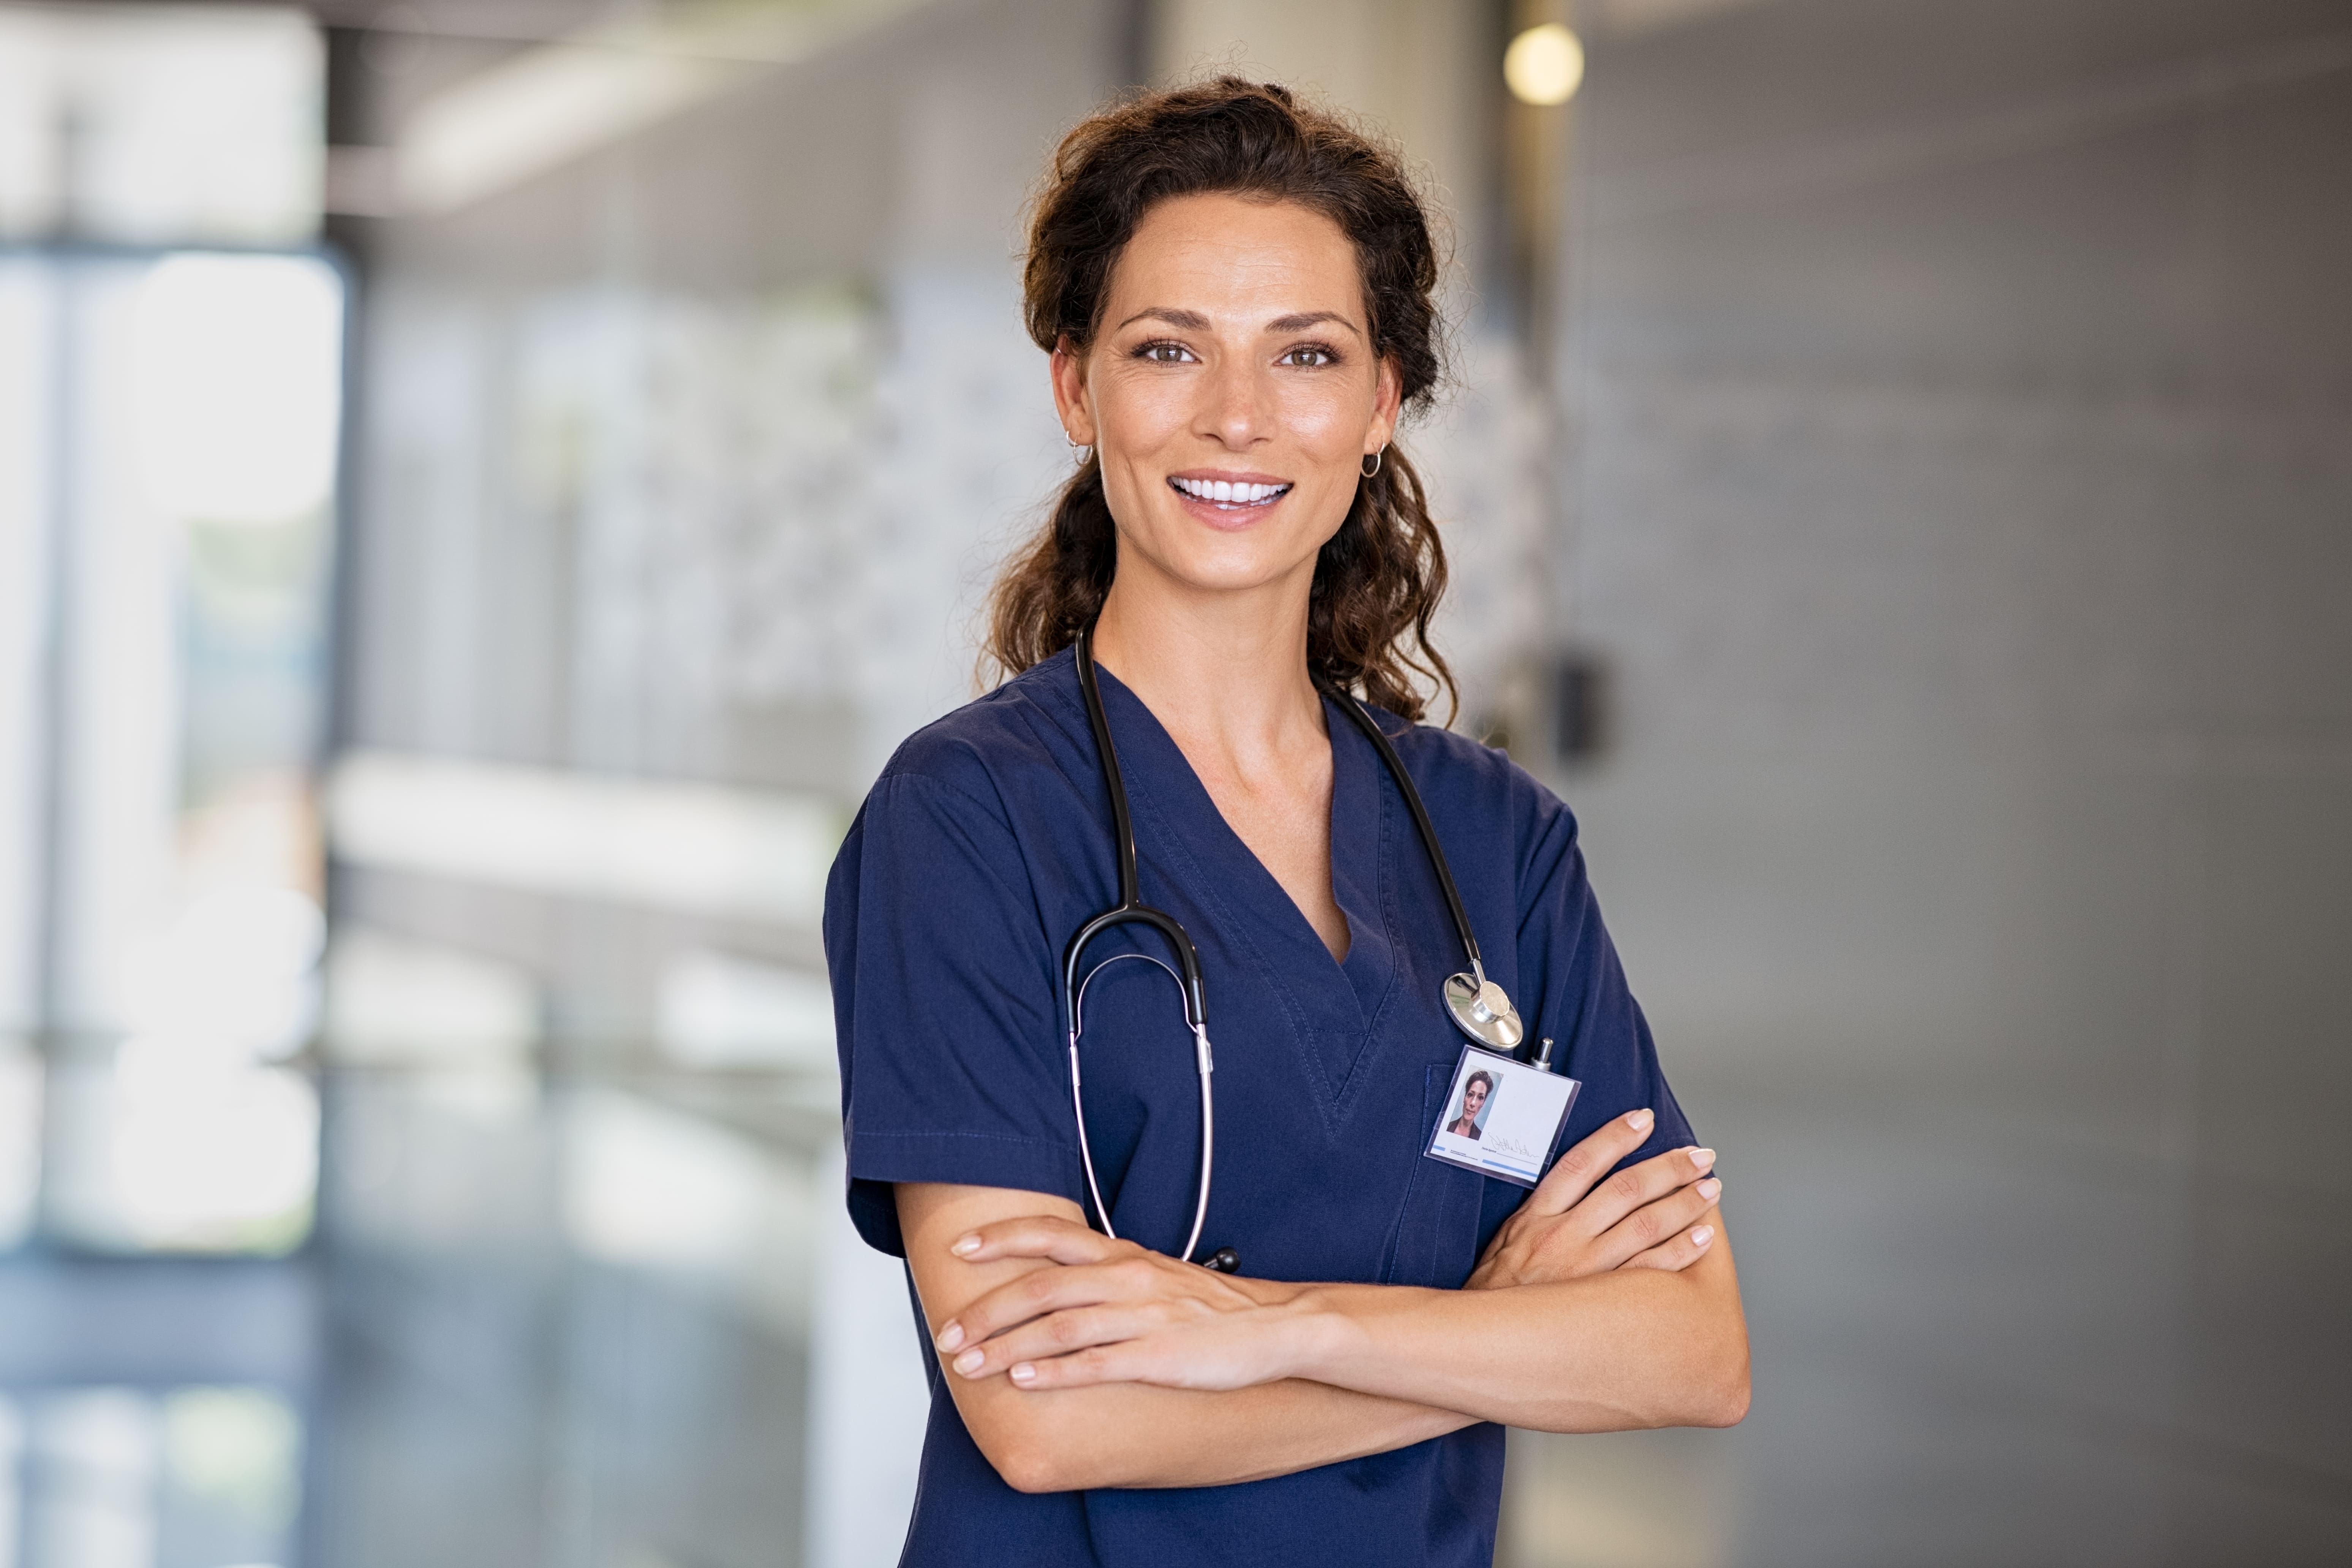 Nurse Interview Questions for New Grad Healthcare Workers in the USA